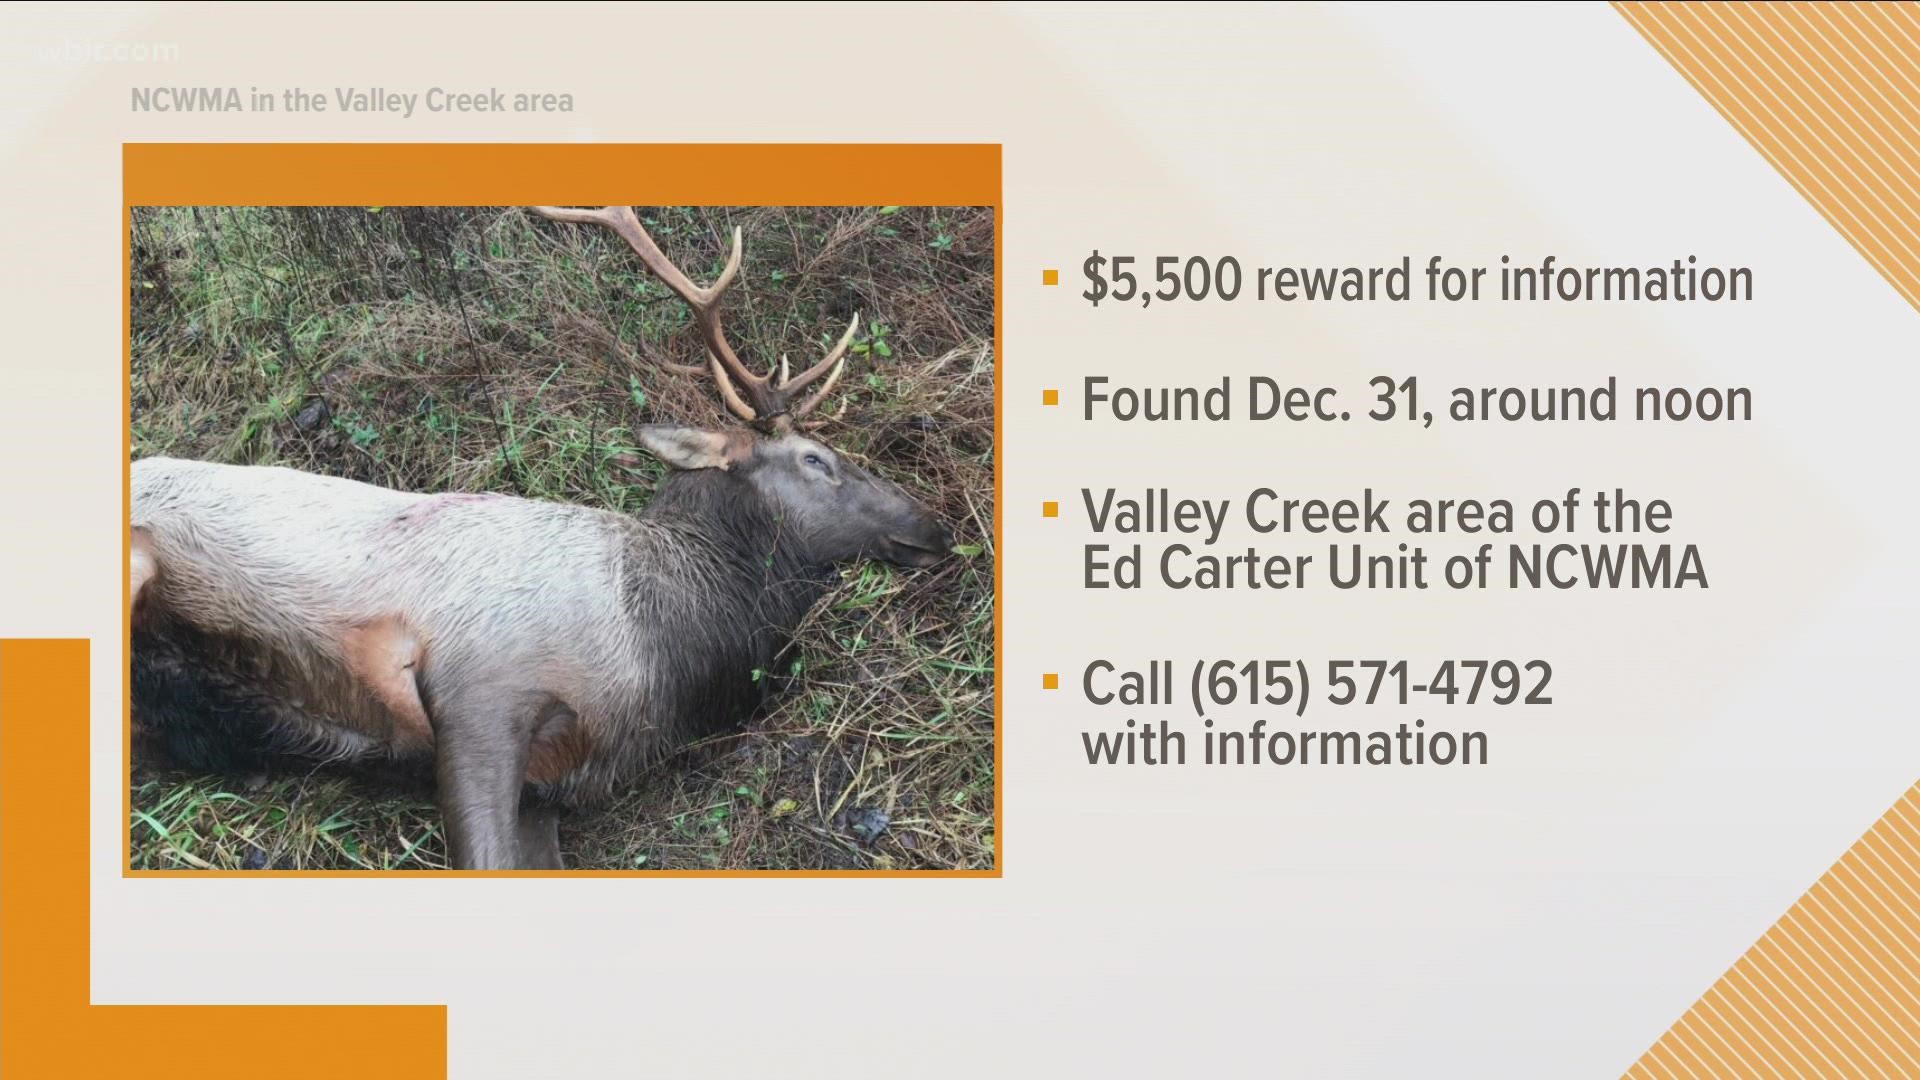 Investigators say someone illegally shot an elk in Claiborne county at the end of last year.